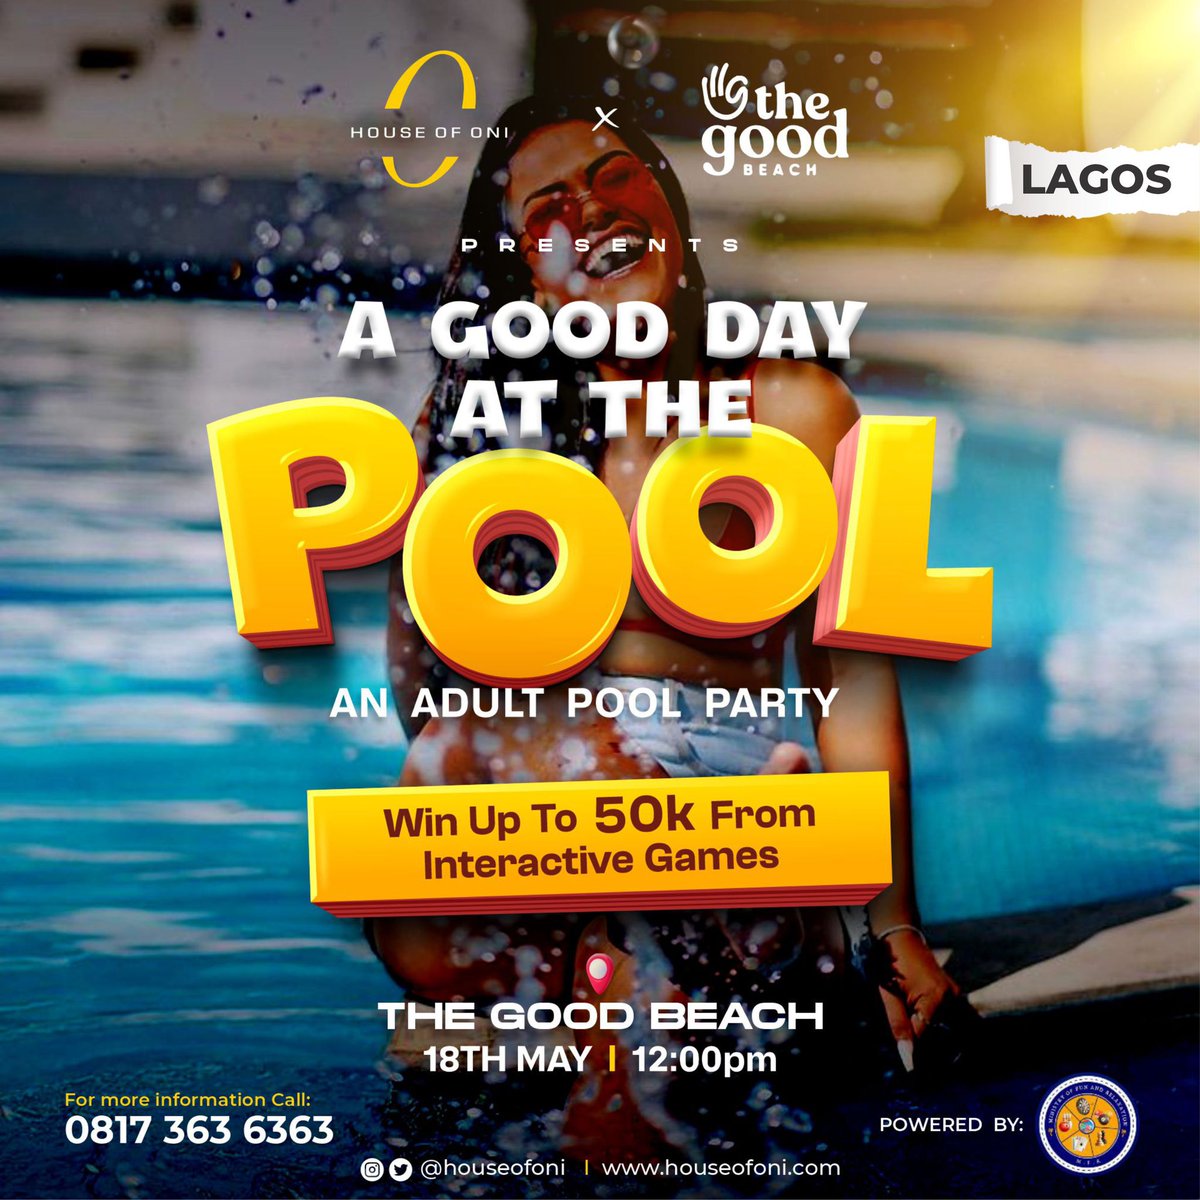 Upto N50,000 up for grabs 🙌🏽 at the hottest adult pool party! 

To get your tickets send us a whatsapp message 08173636363

#houseofoni #houseofoniparty #thegoodbeach #beachvibes #lagosparty #hoo #newadventures #silentdisco #silentdiscoafrica